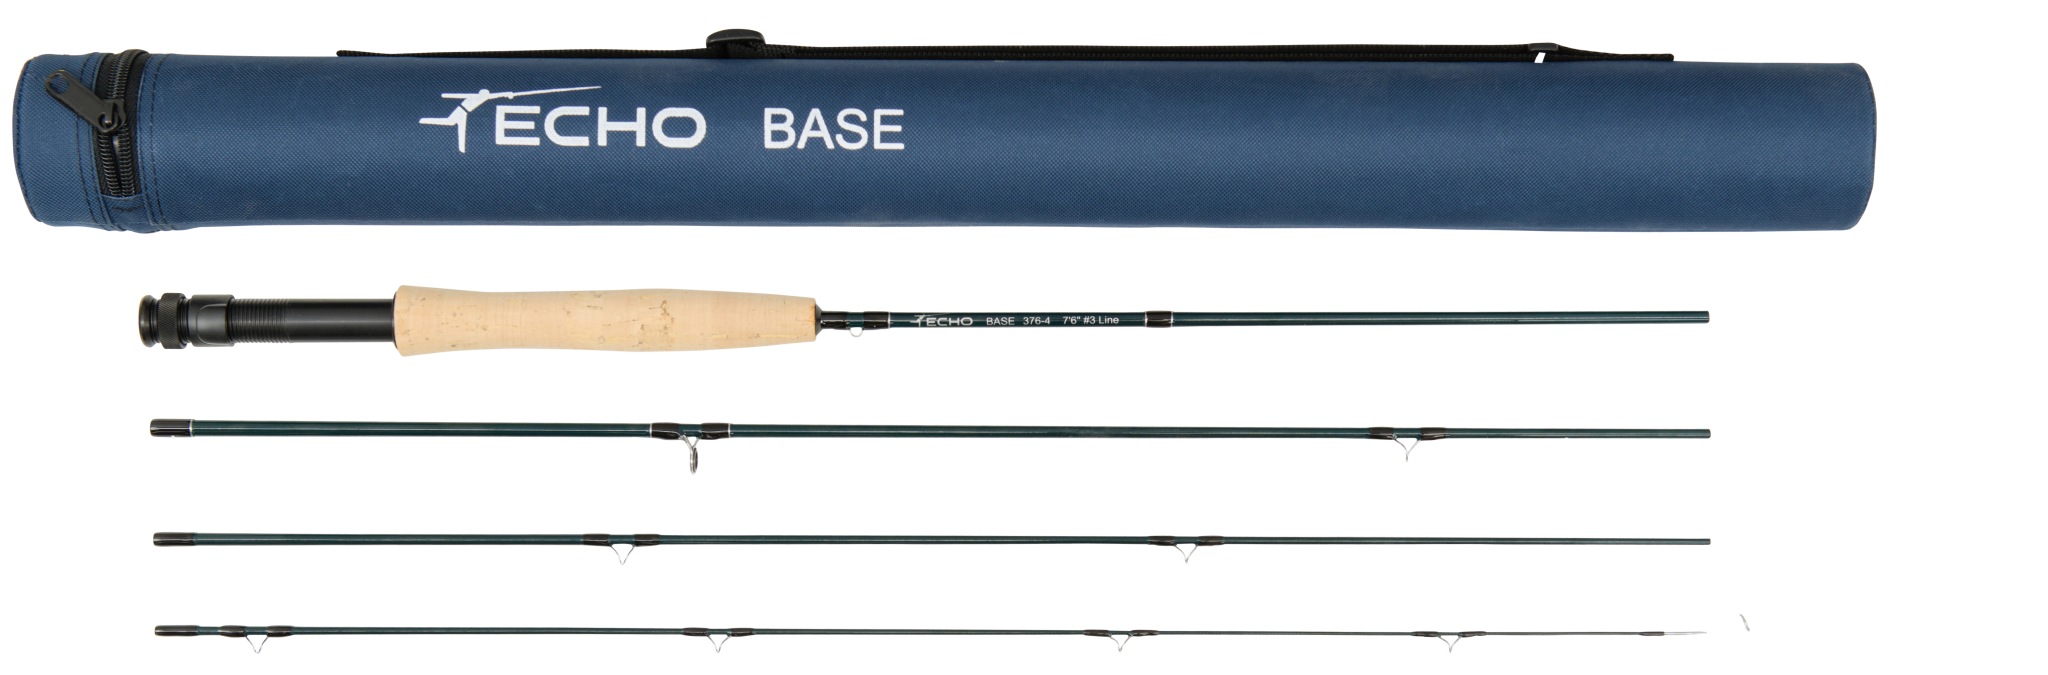 ECHO BASE 9'0" #6- 4 Piece Fly Rod - Medium fast action, four-piece travel design, chrome guides, black anodized reel seat